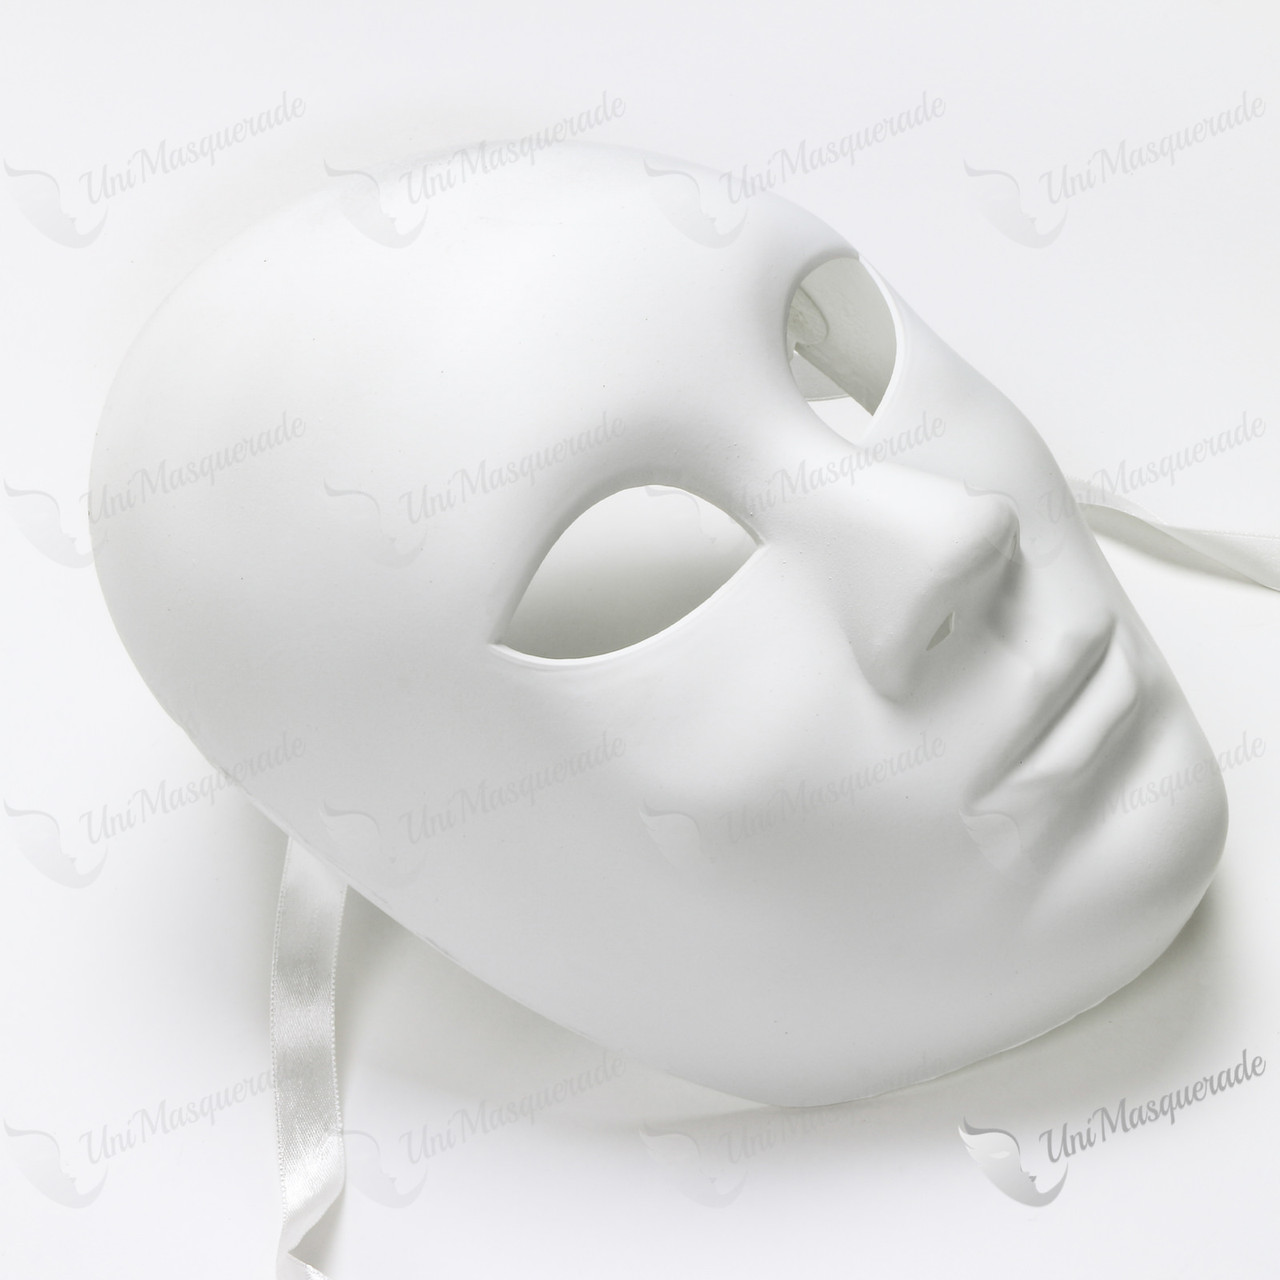 Volto venetian face mask (blank white) Type A